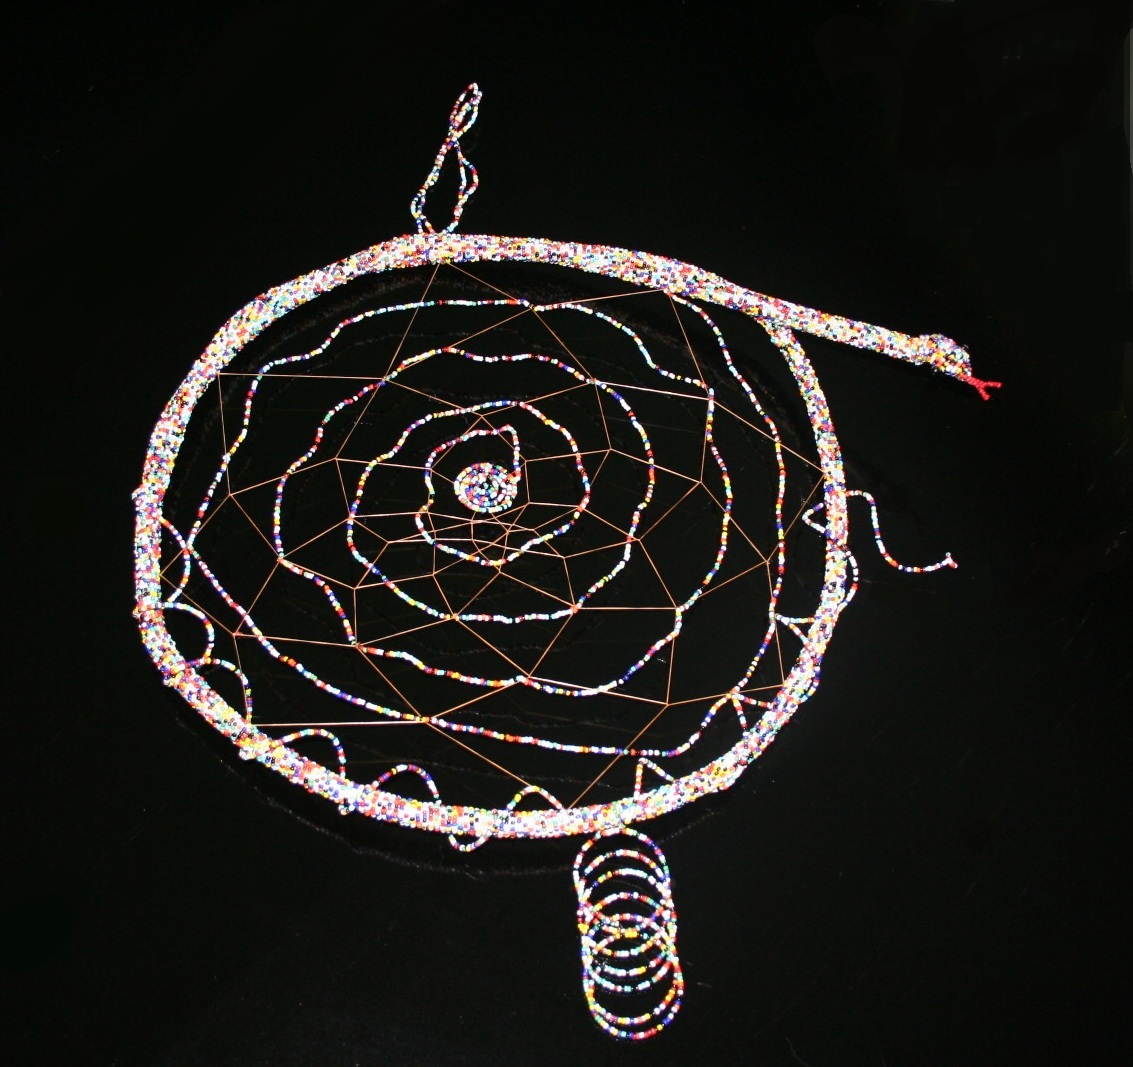 snake dance beaded snake dreamcatcher by john pete with coiled snake hoop and lots of colorful beads